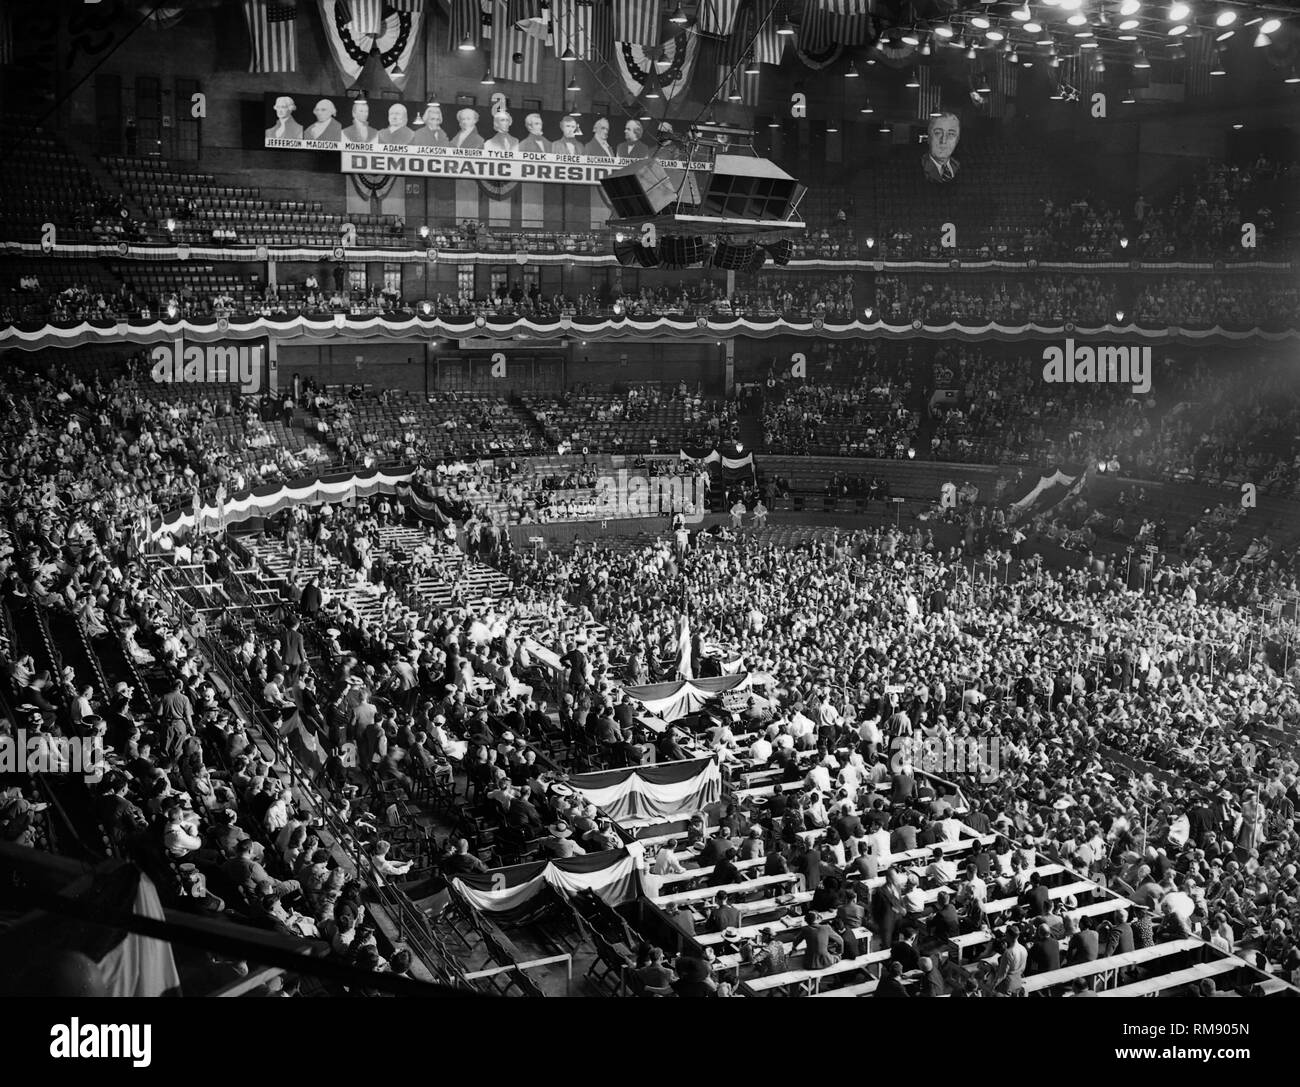 The floor of the 1944 Democratic National Convention at the Chicago Stadium is shown. Stock Photo